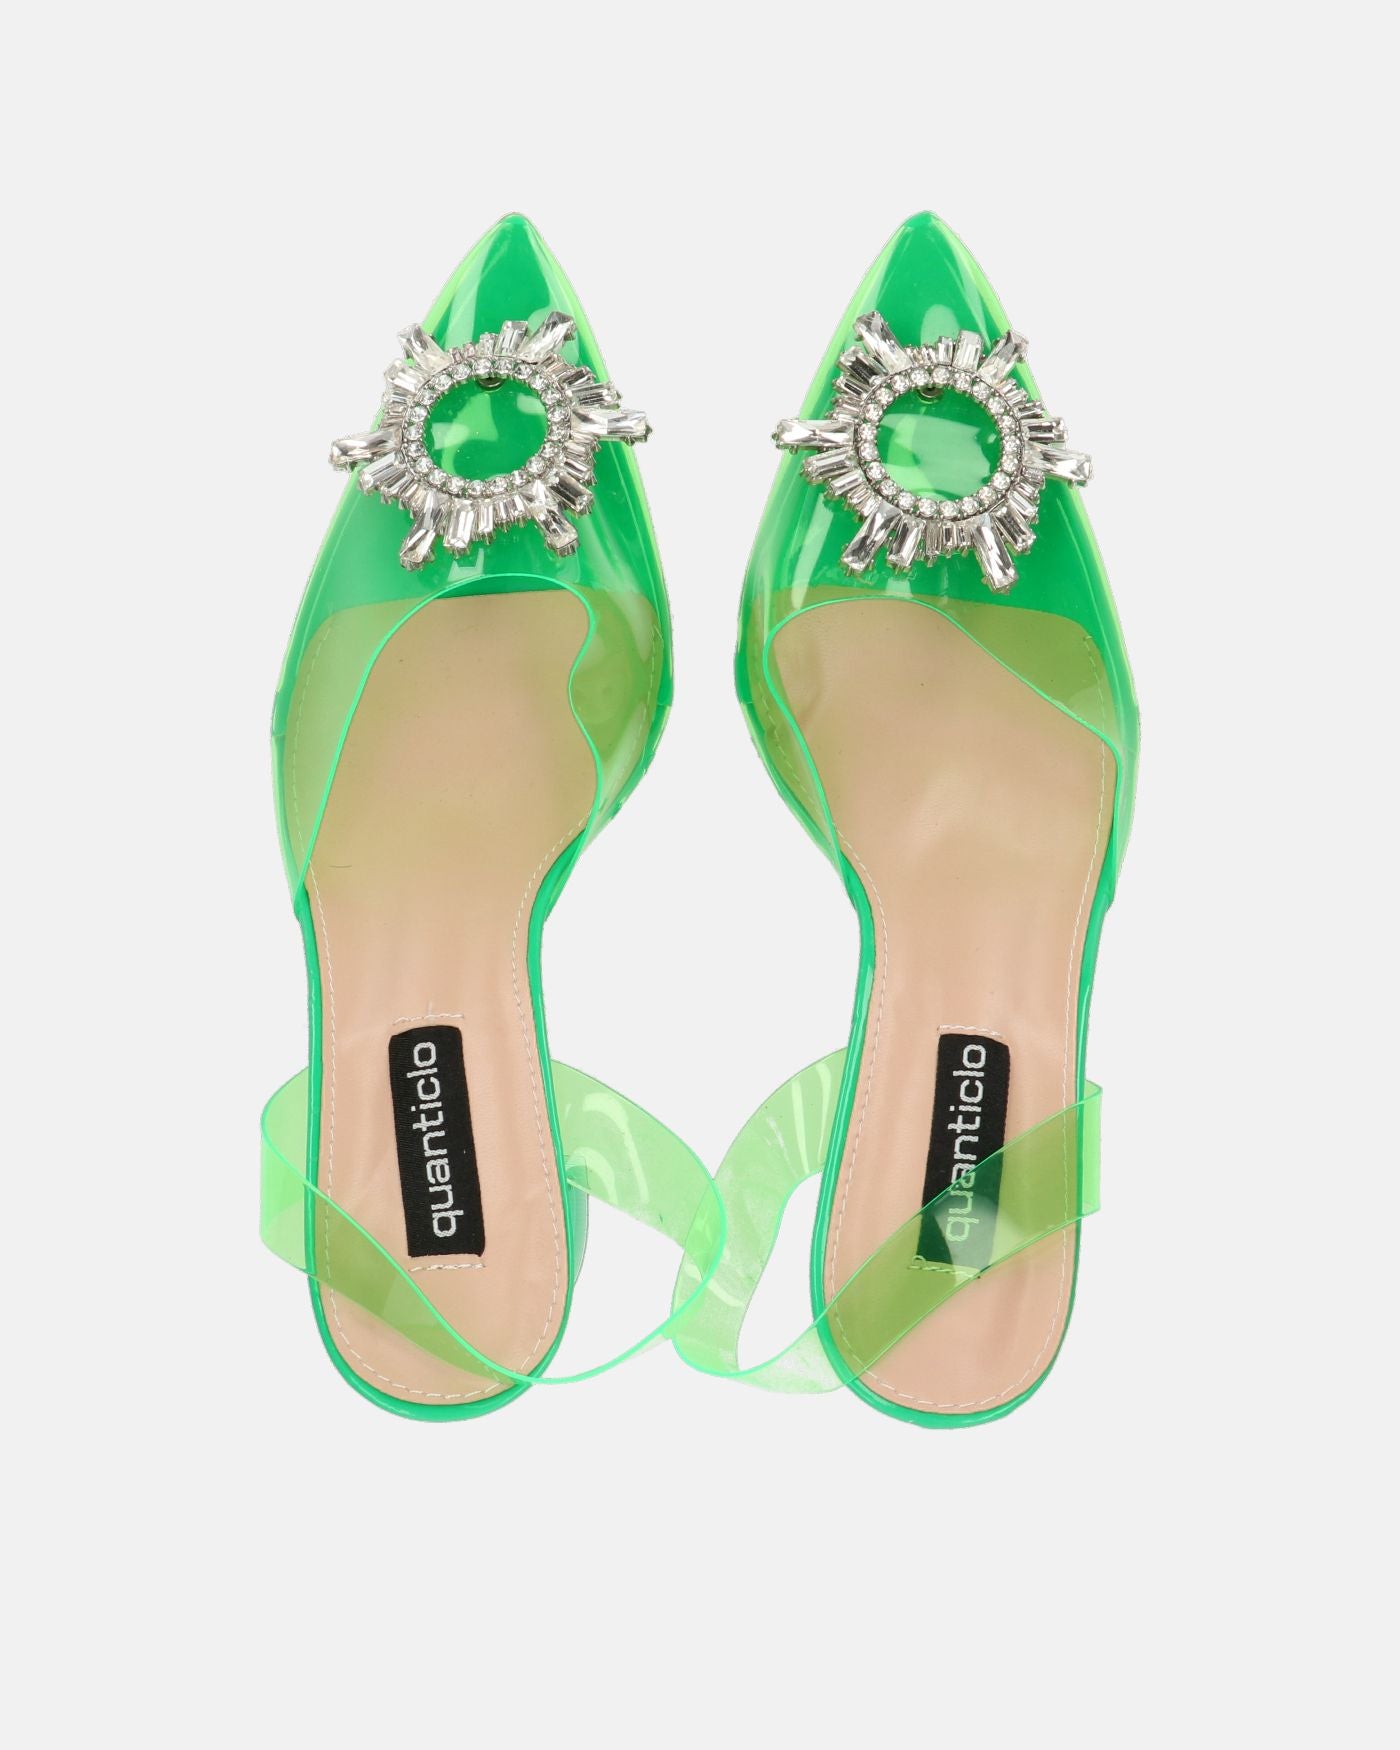 KENAN - green perspex shoes with gemstone decoration on the toe